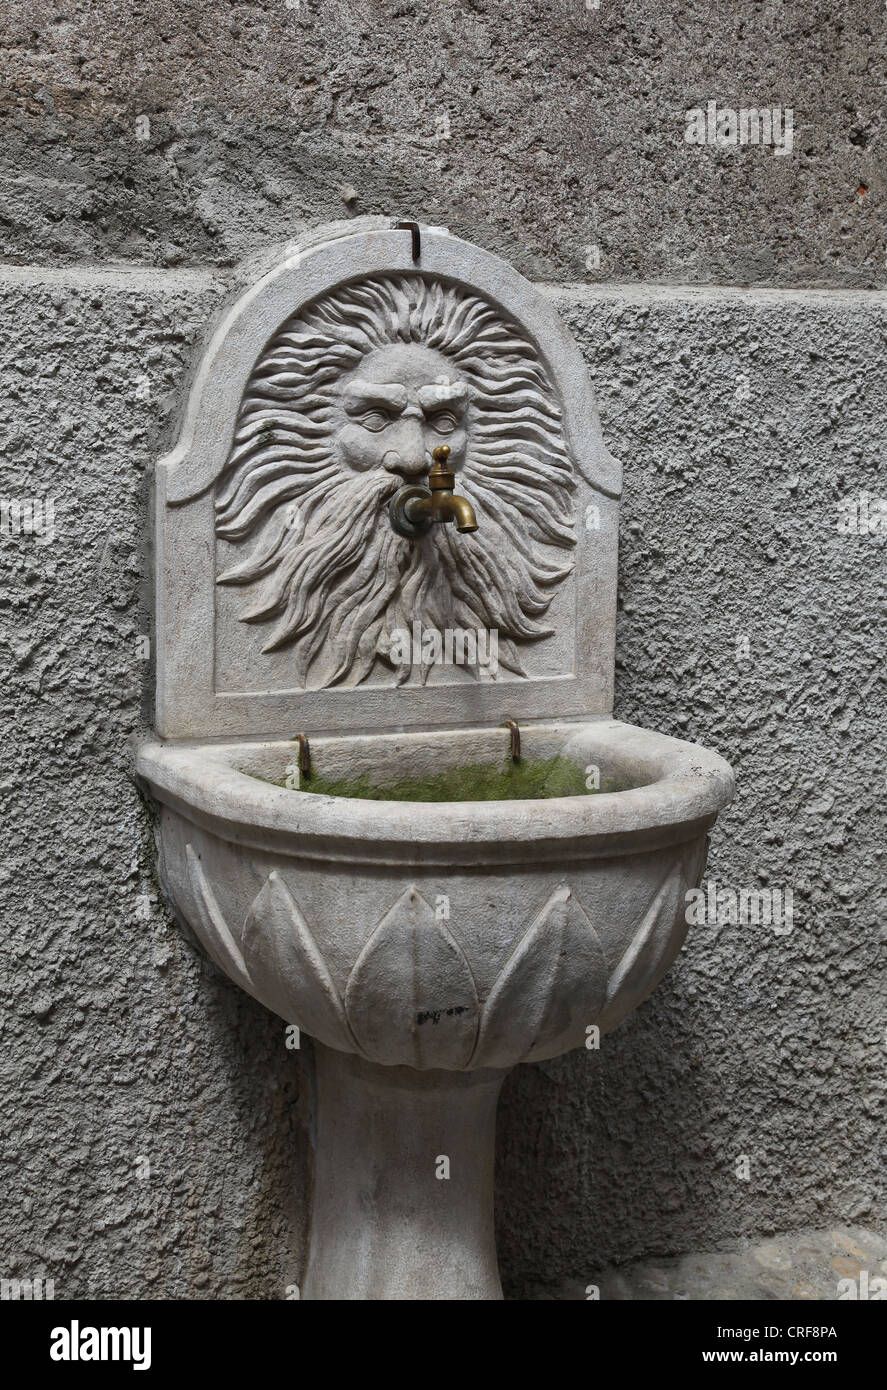 An Italian stone drinking trough or water tap Stock Photo